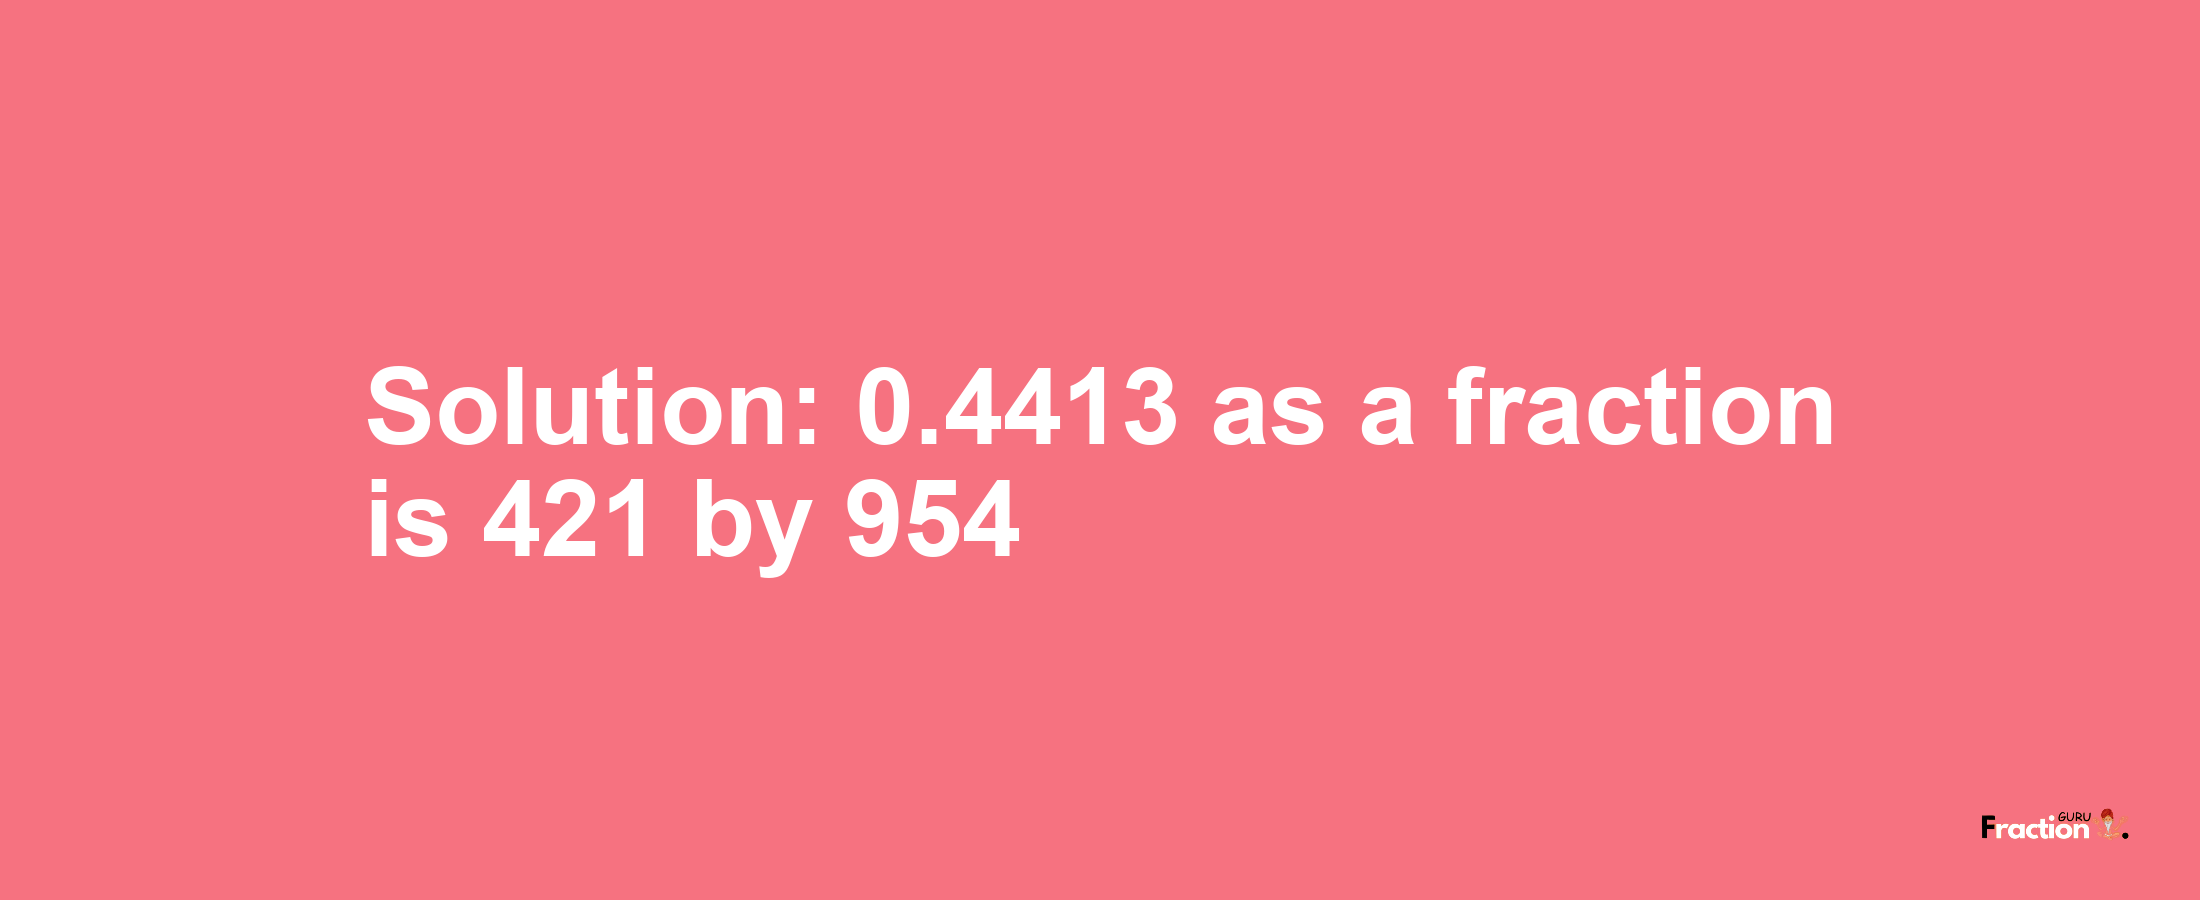 Solution:0.4413 as a fraction is 421/954